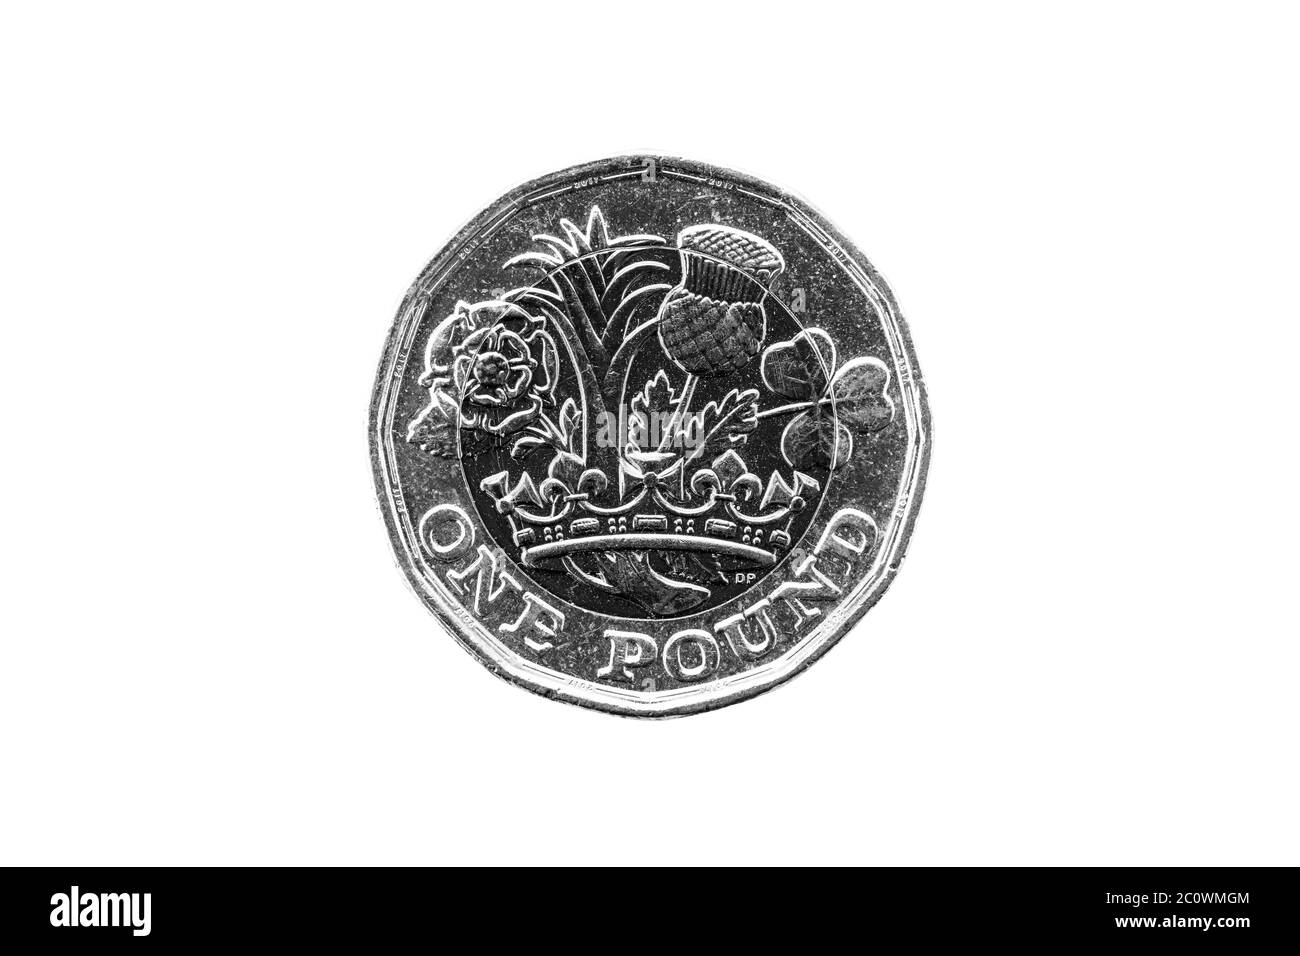 New one pound coin of England UK introduced in 2017 which show emblems of each of the nations cut out and isolated on a white background black & white Stock Photo